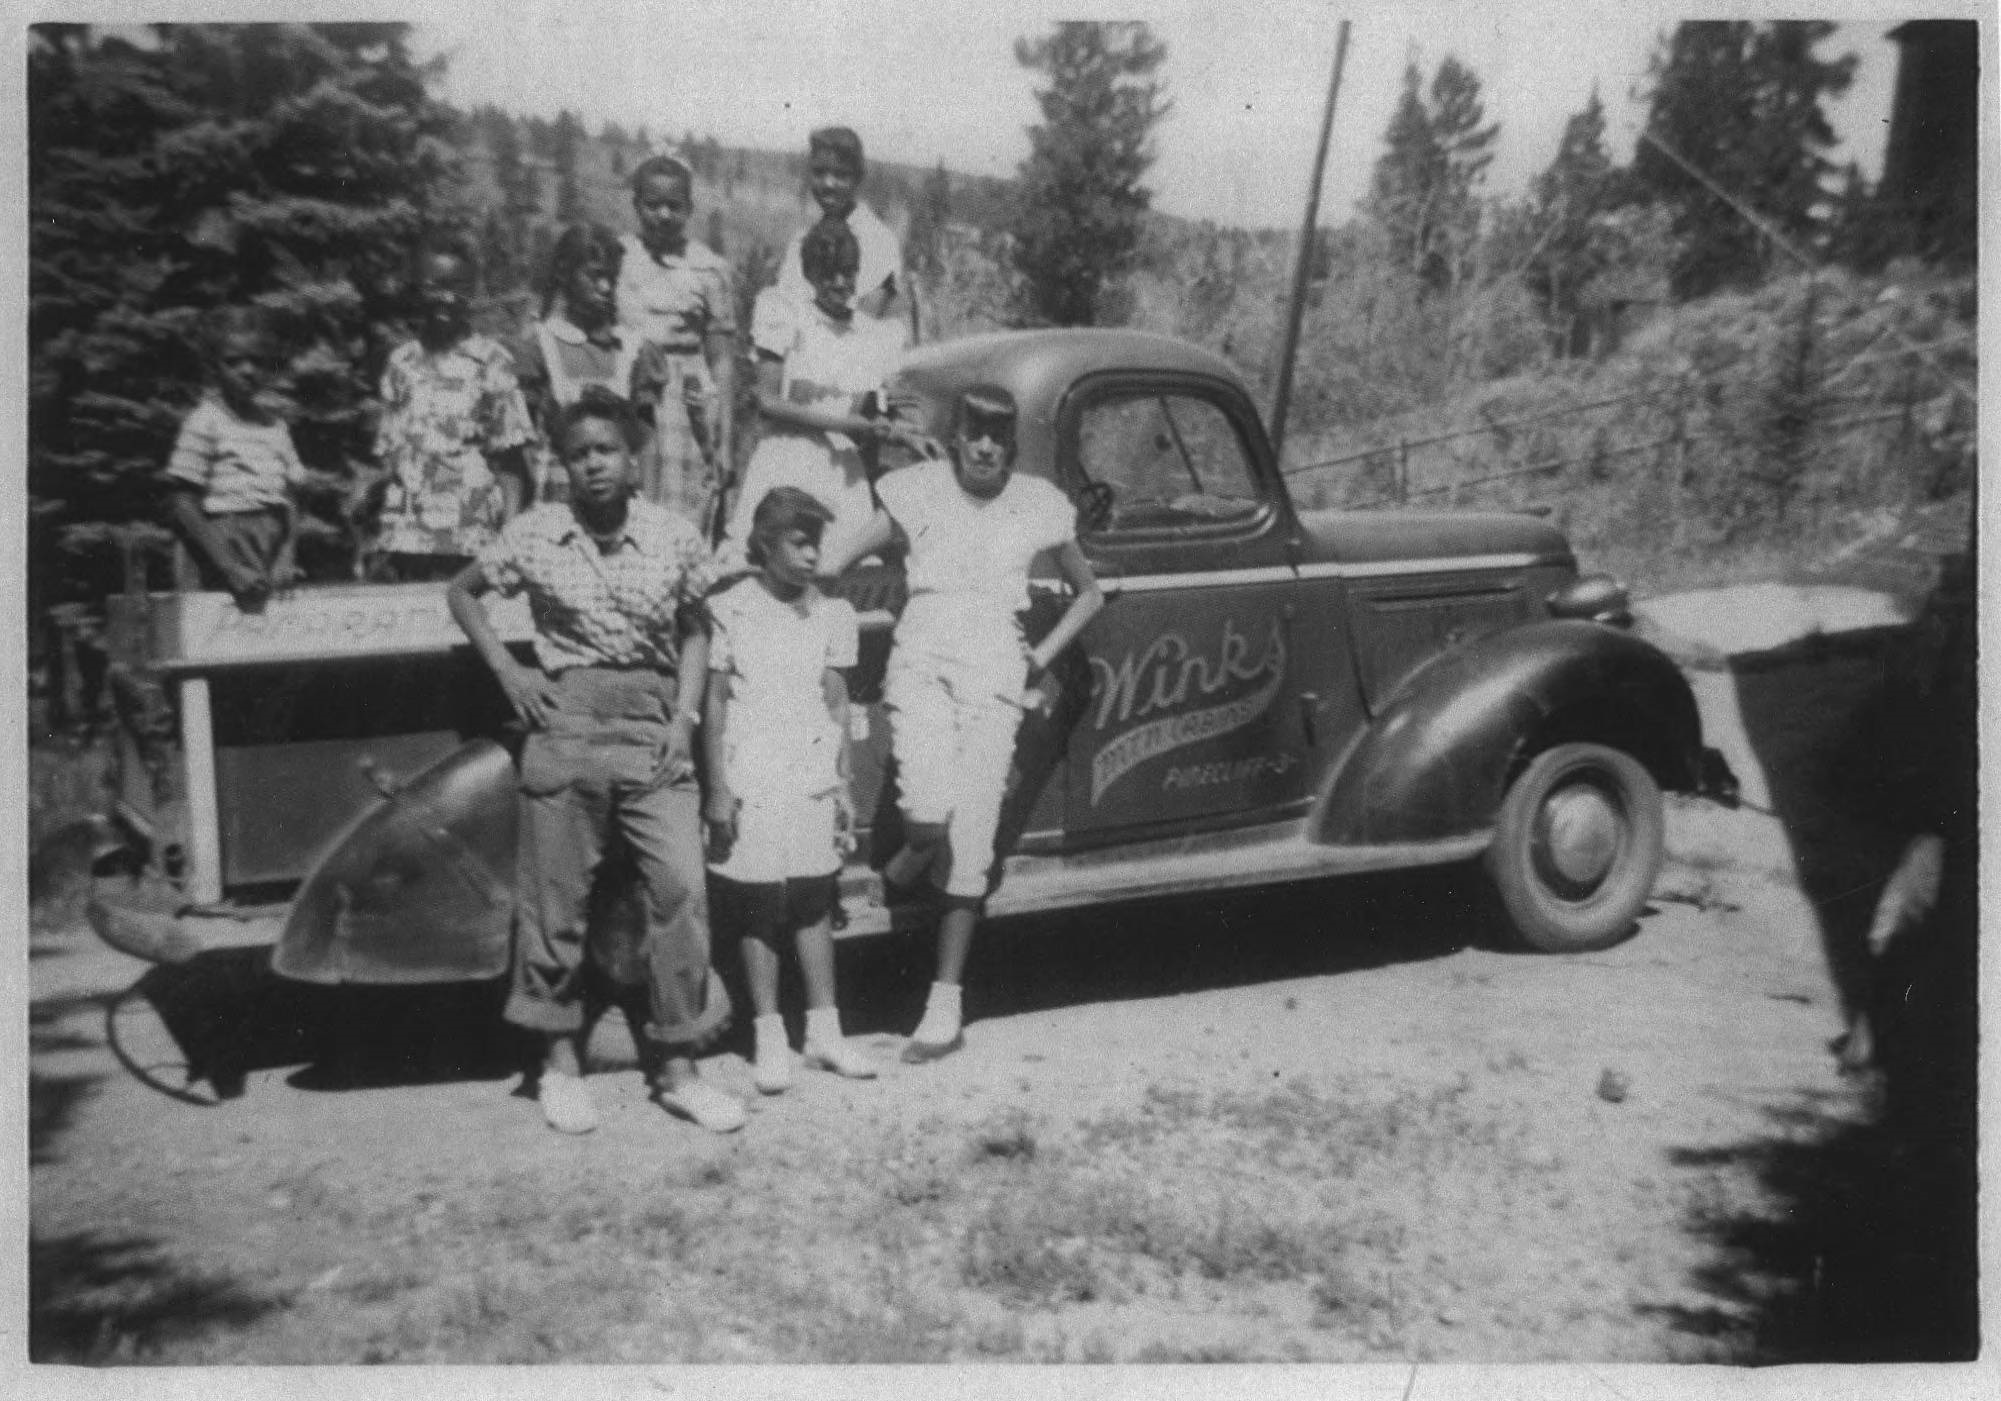 Children stand in and in front of a “Winks Mountain Cabins” pickup truck in the 1950s